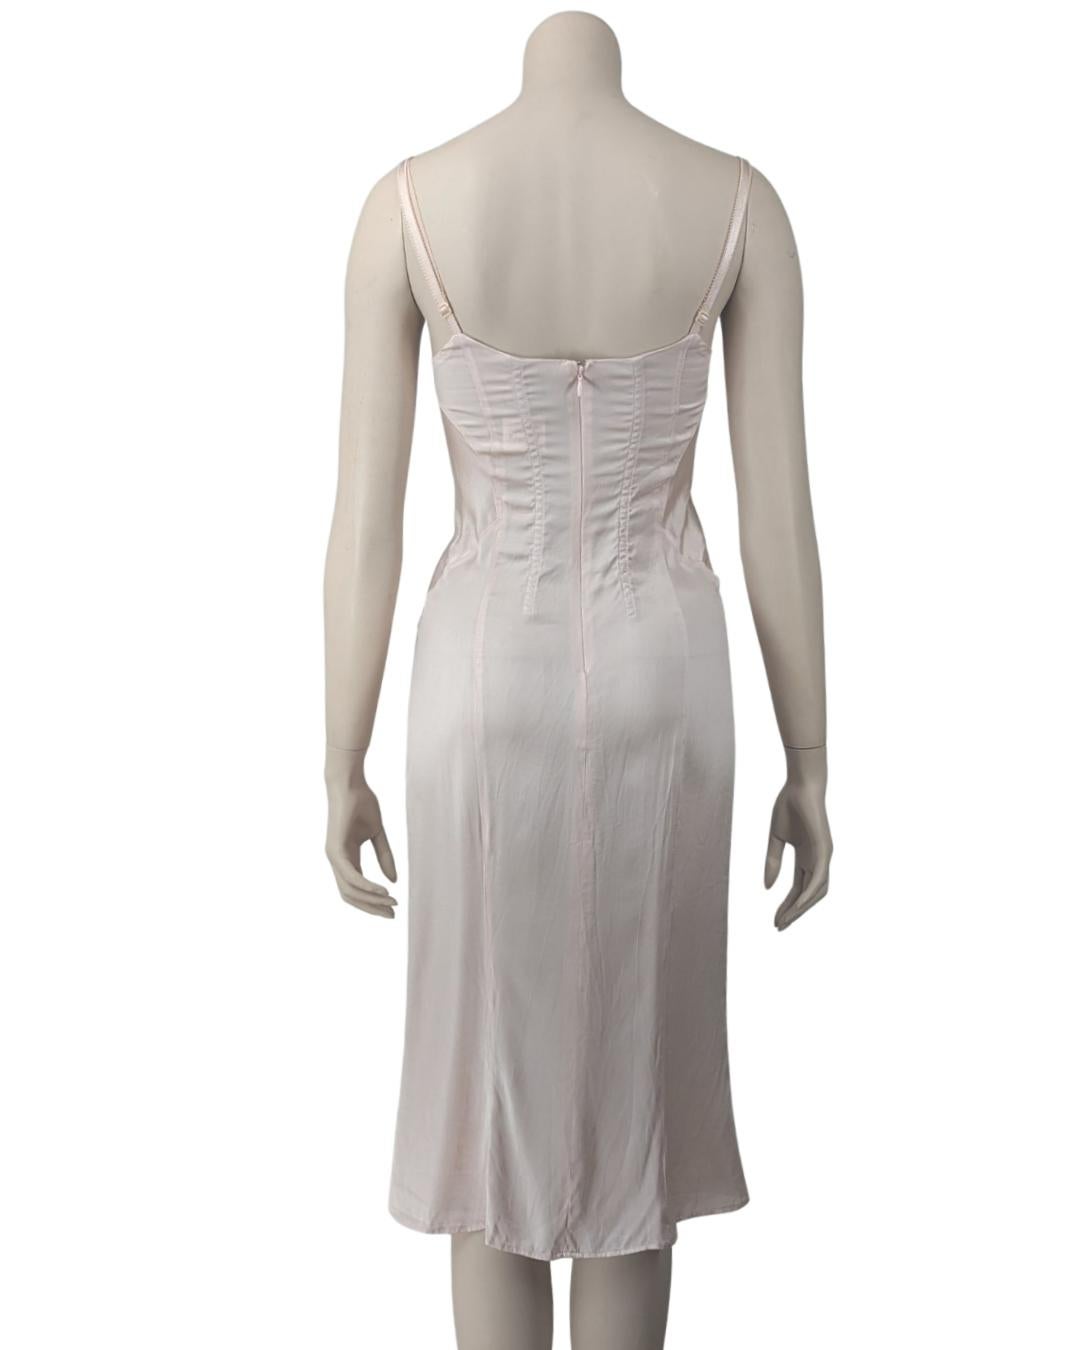 D&G Light Pink Iconic Silk Corset Dress For Sale 2